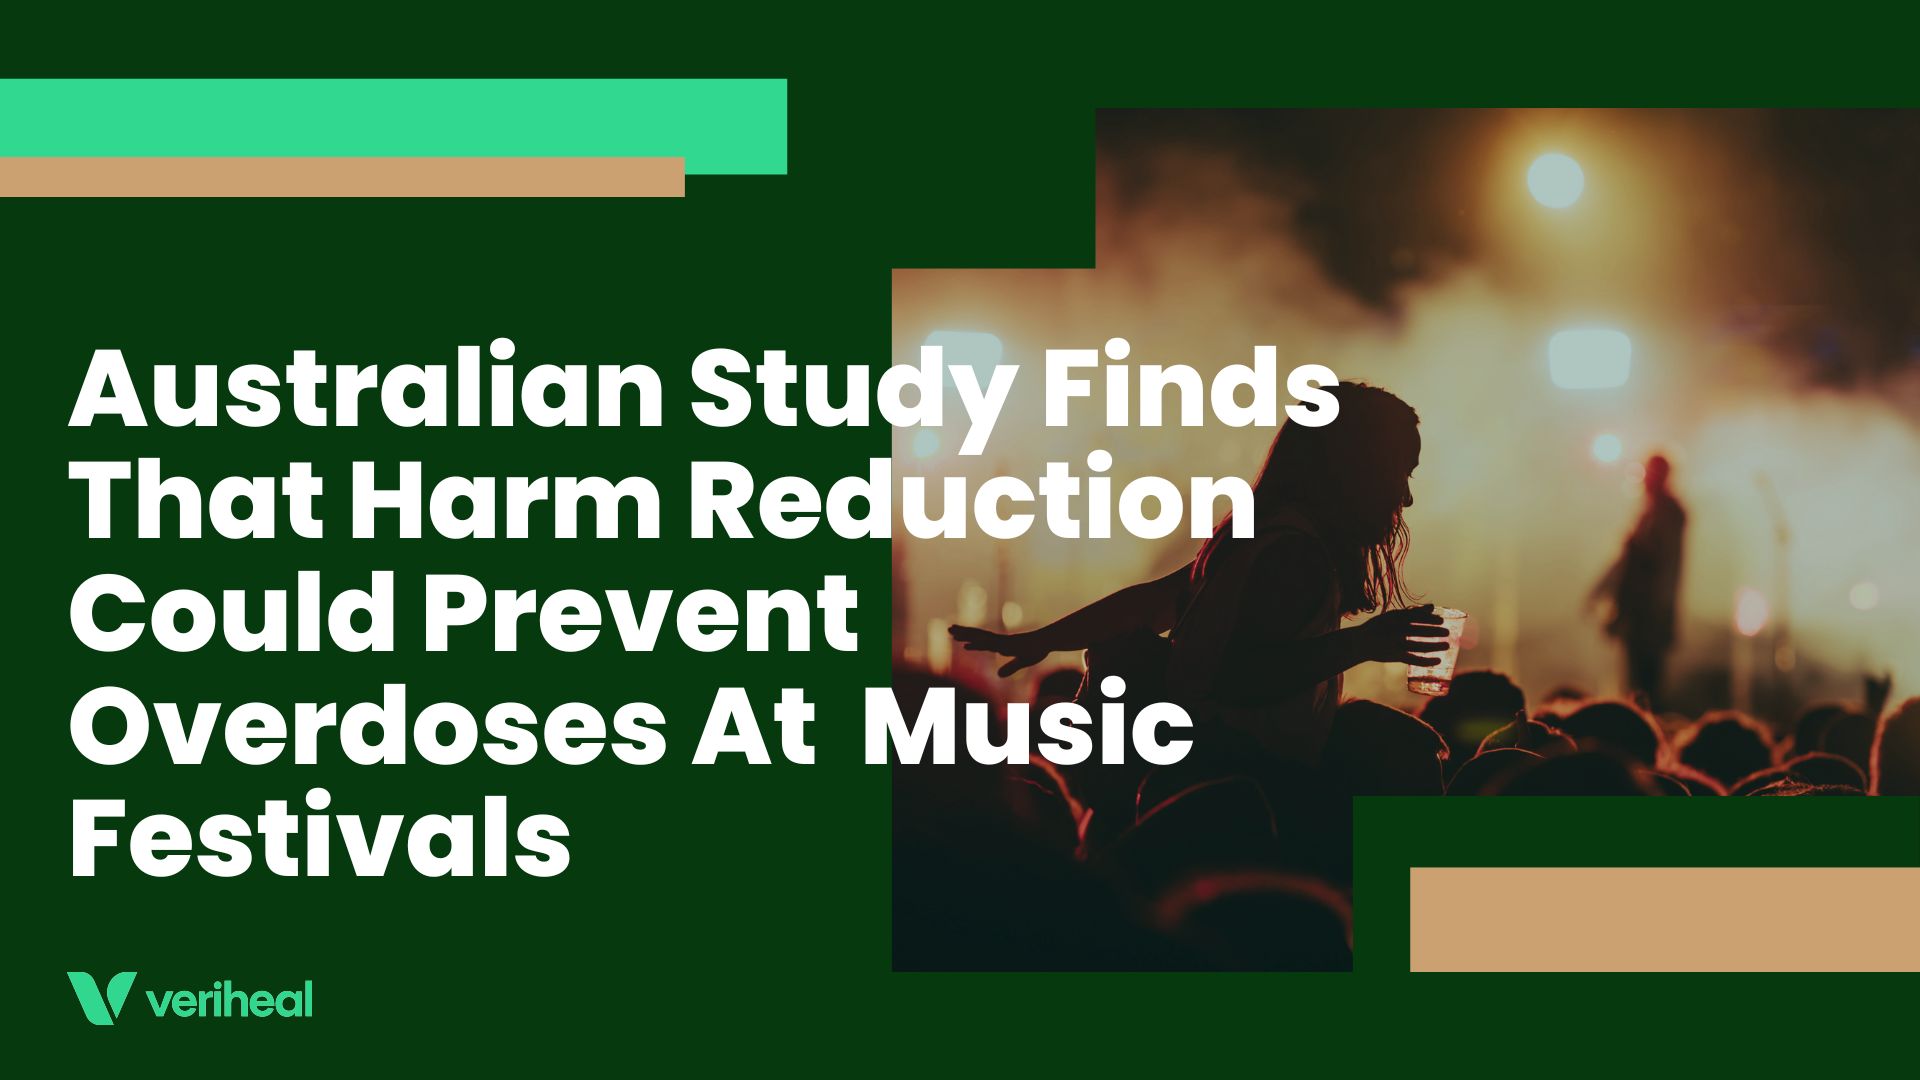 Australian Study Finds That Harm Reduction Could Prevent Overdoses At Music Festivals